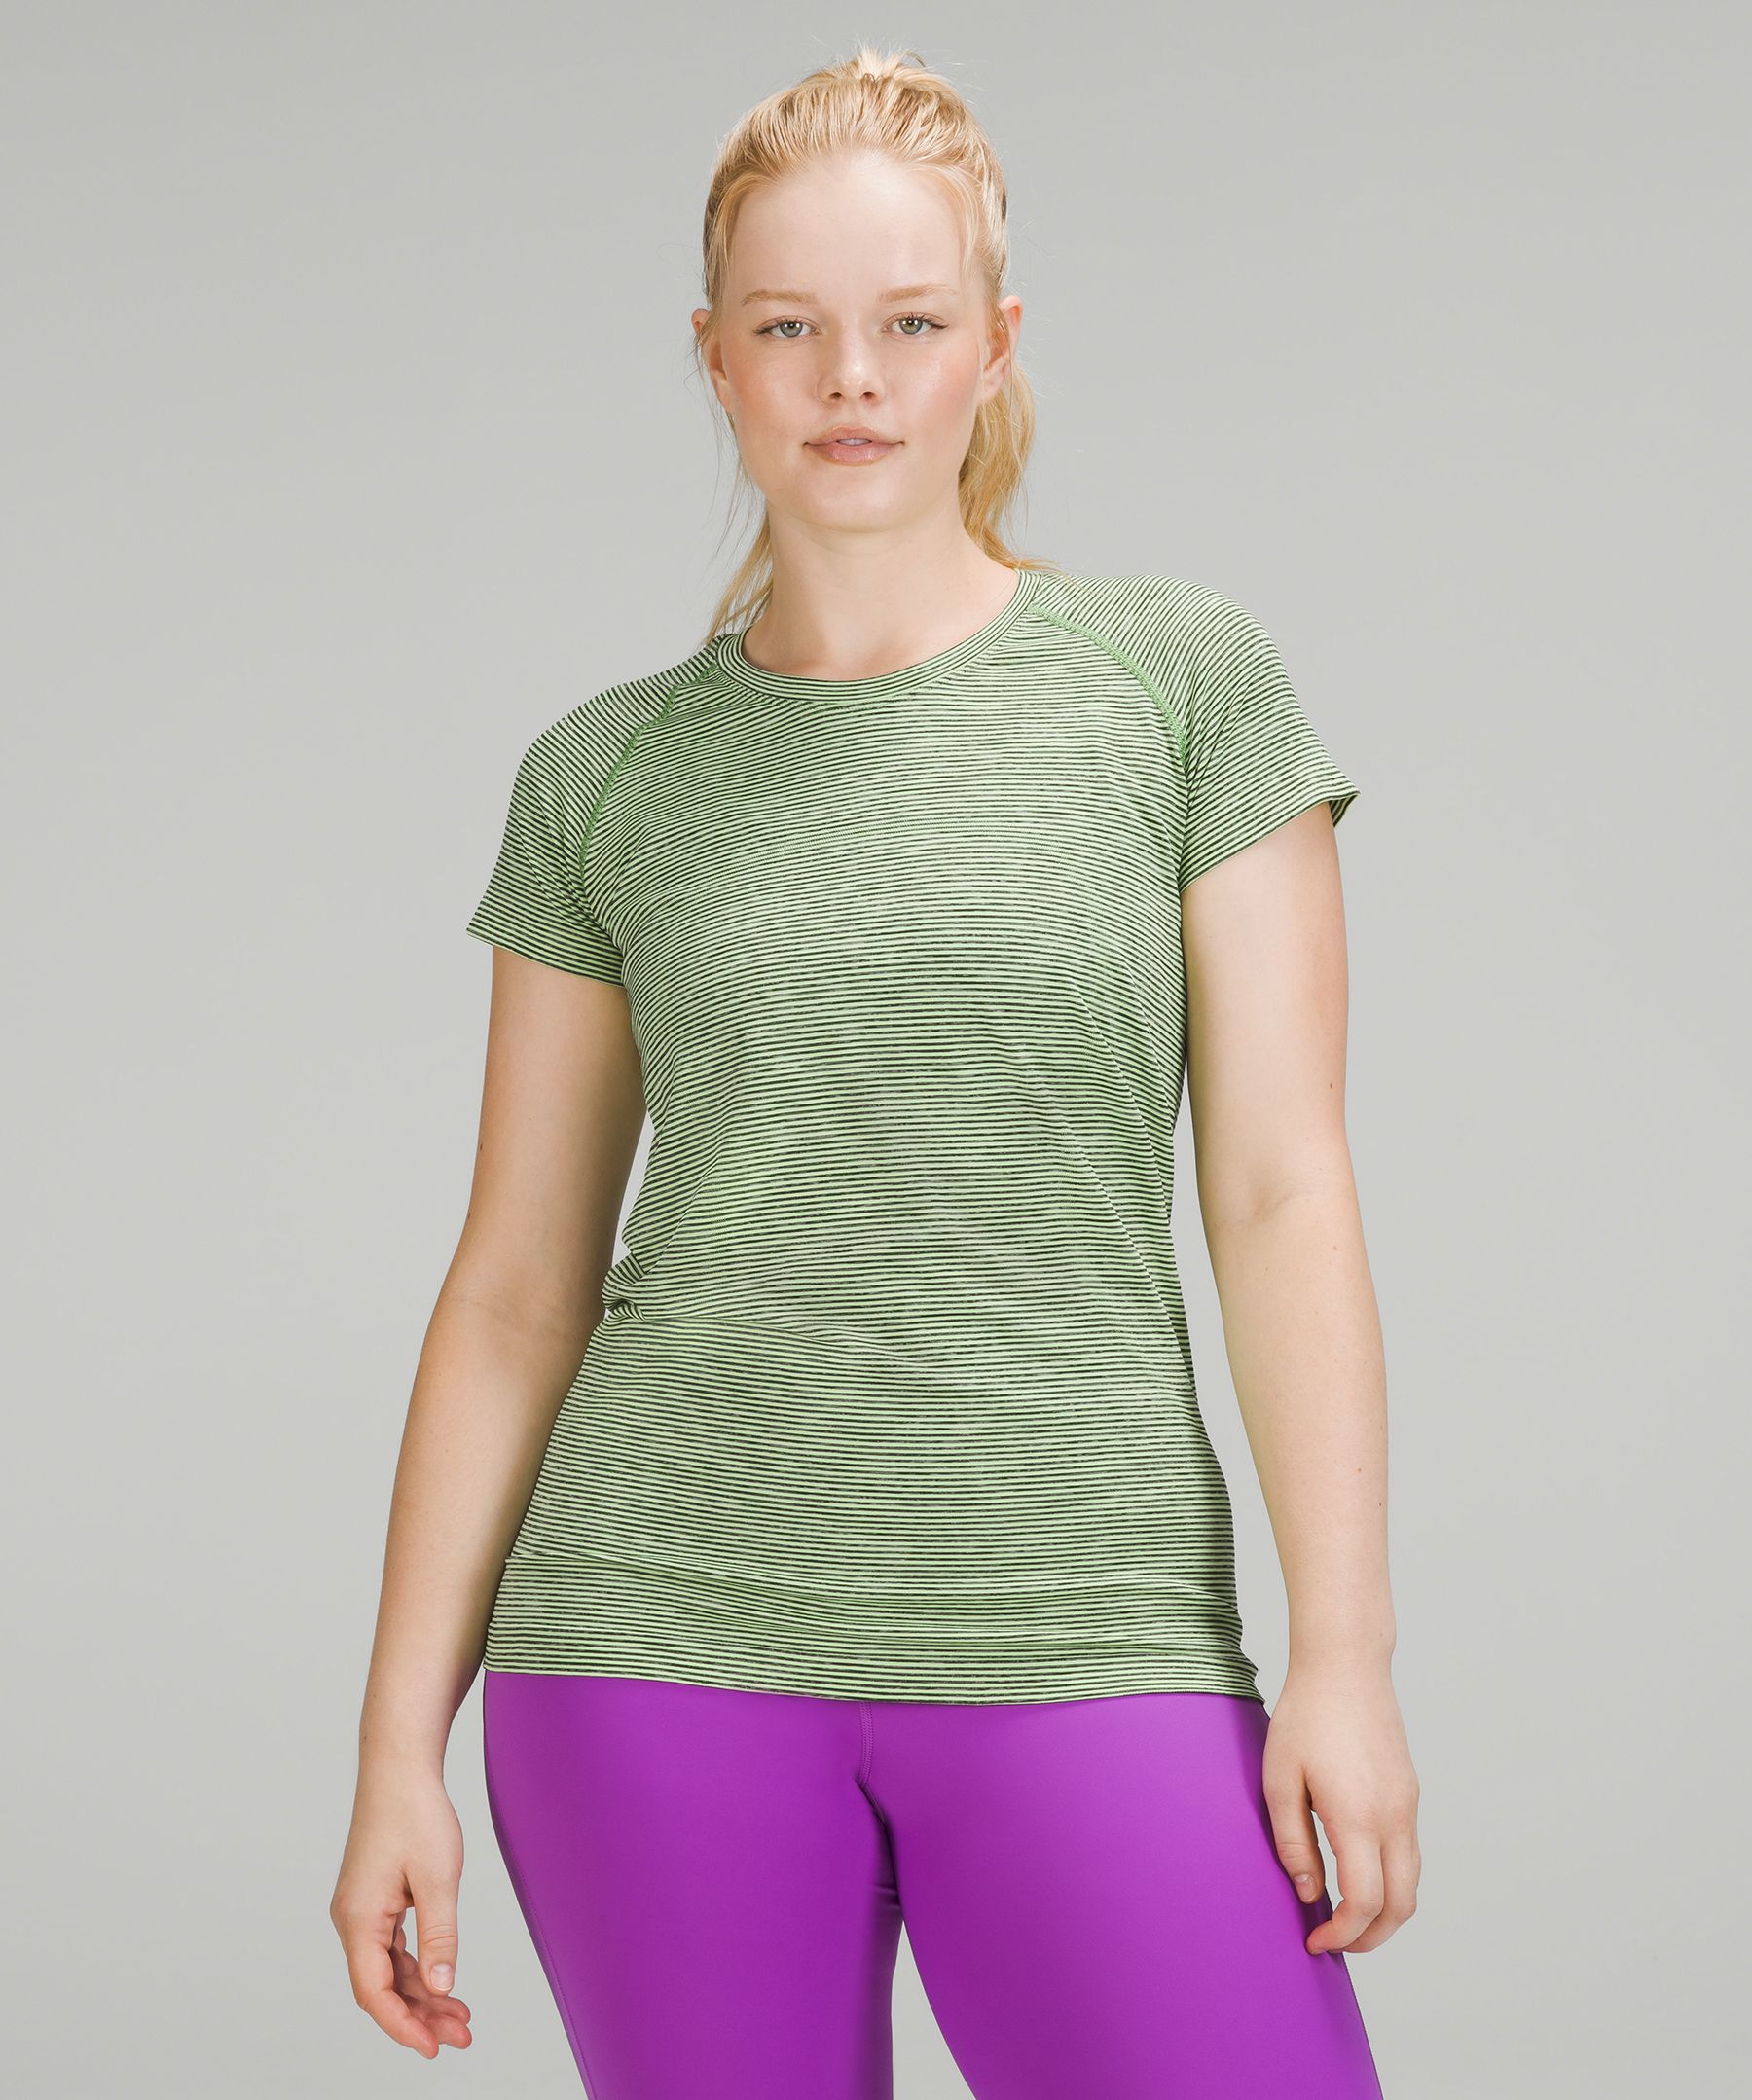 Lululemon Swiftly Tech Short Sleeve Shirt 2.0 In Wee Are From Space Faded Zap